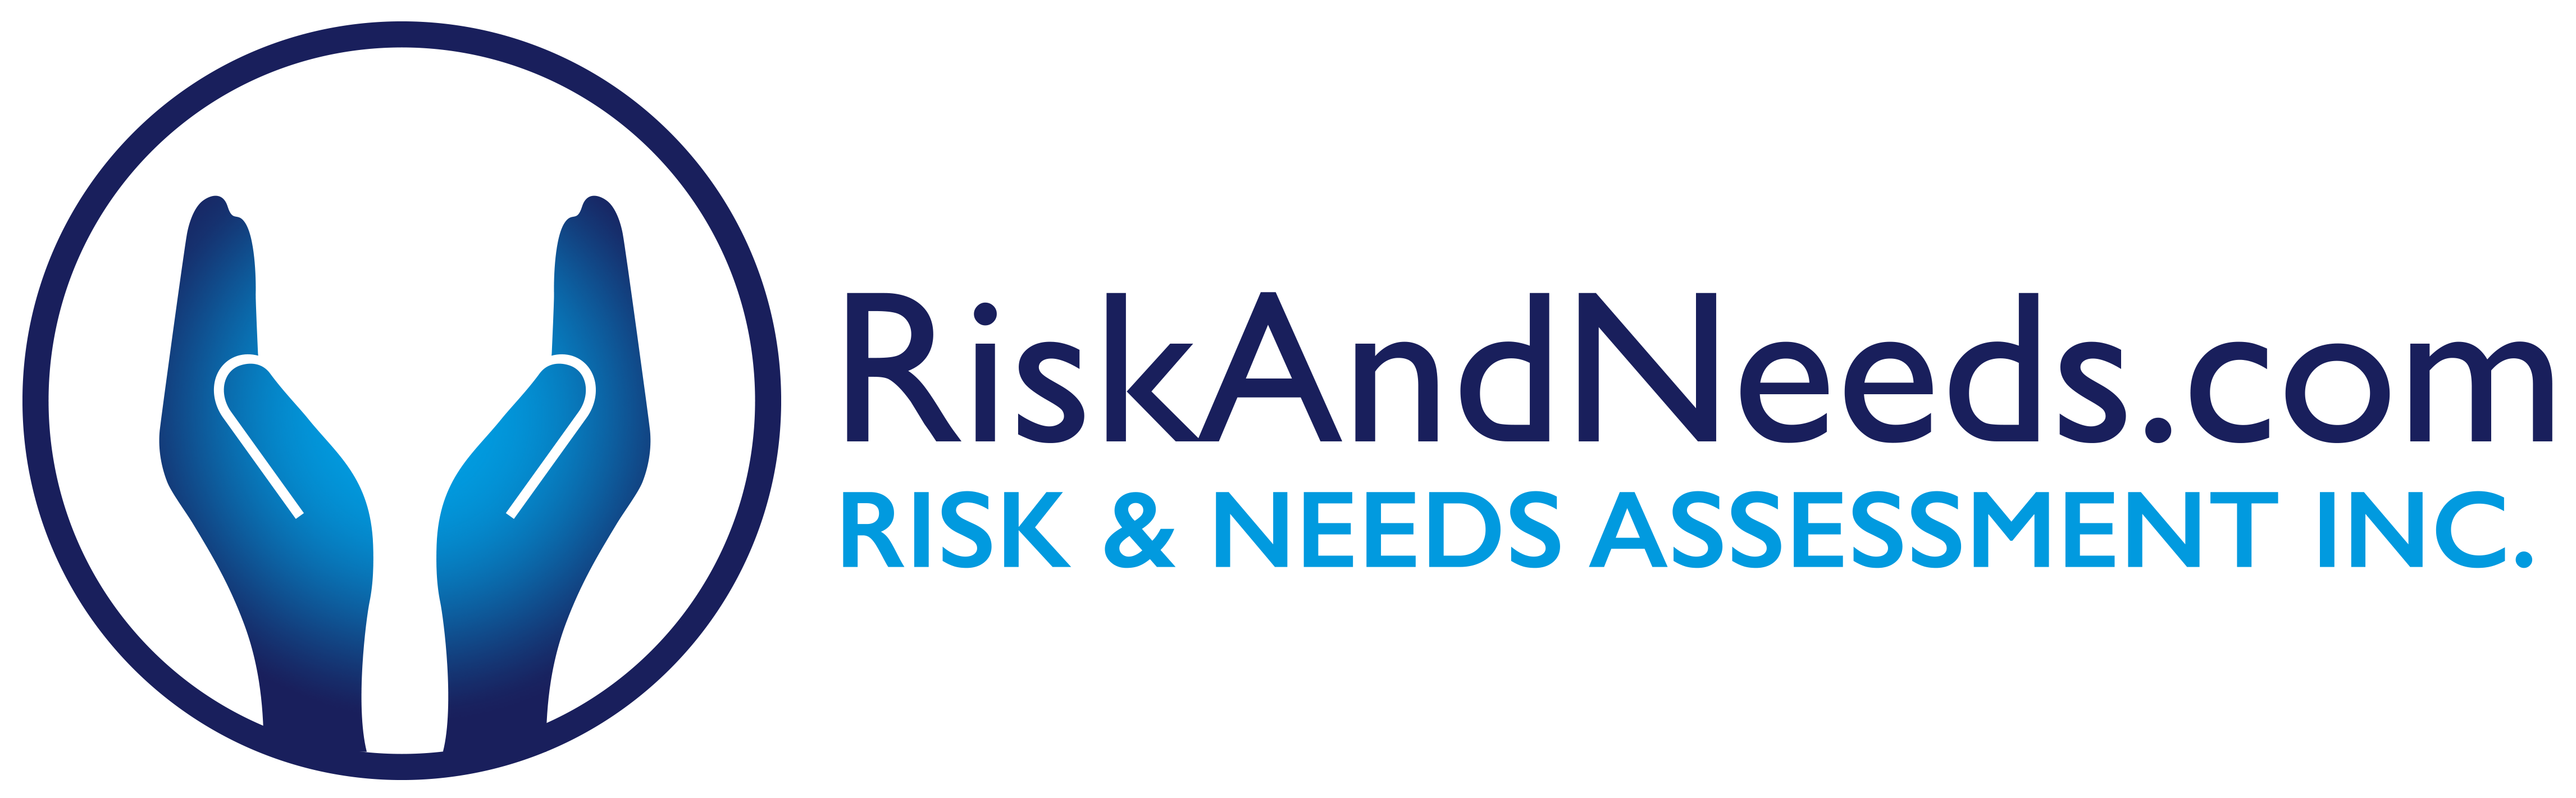 Risk And Needs Logo